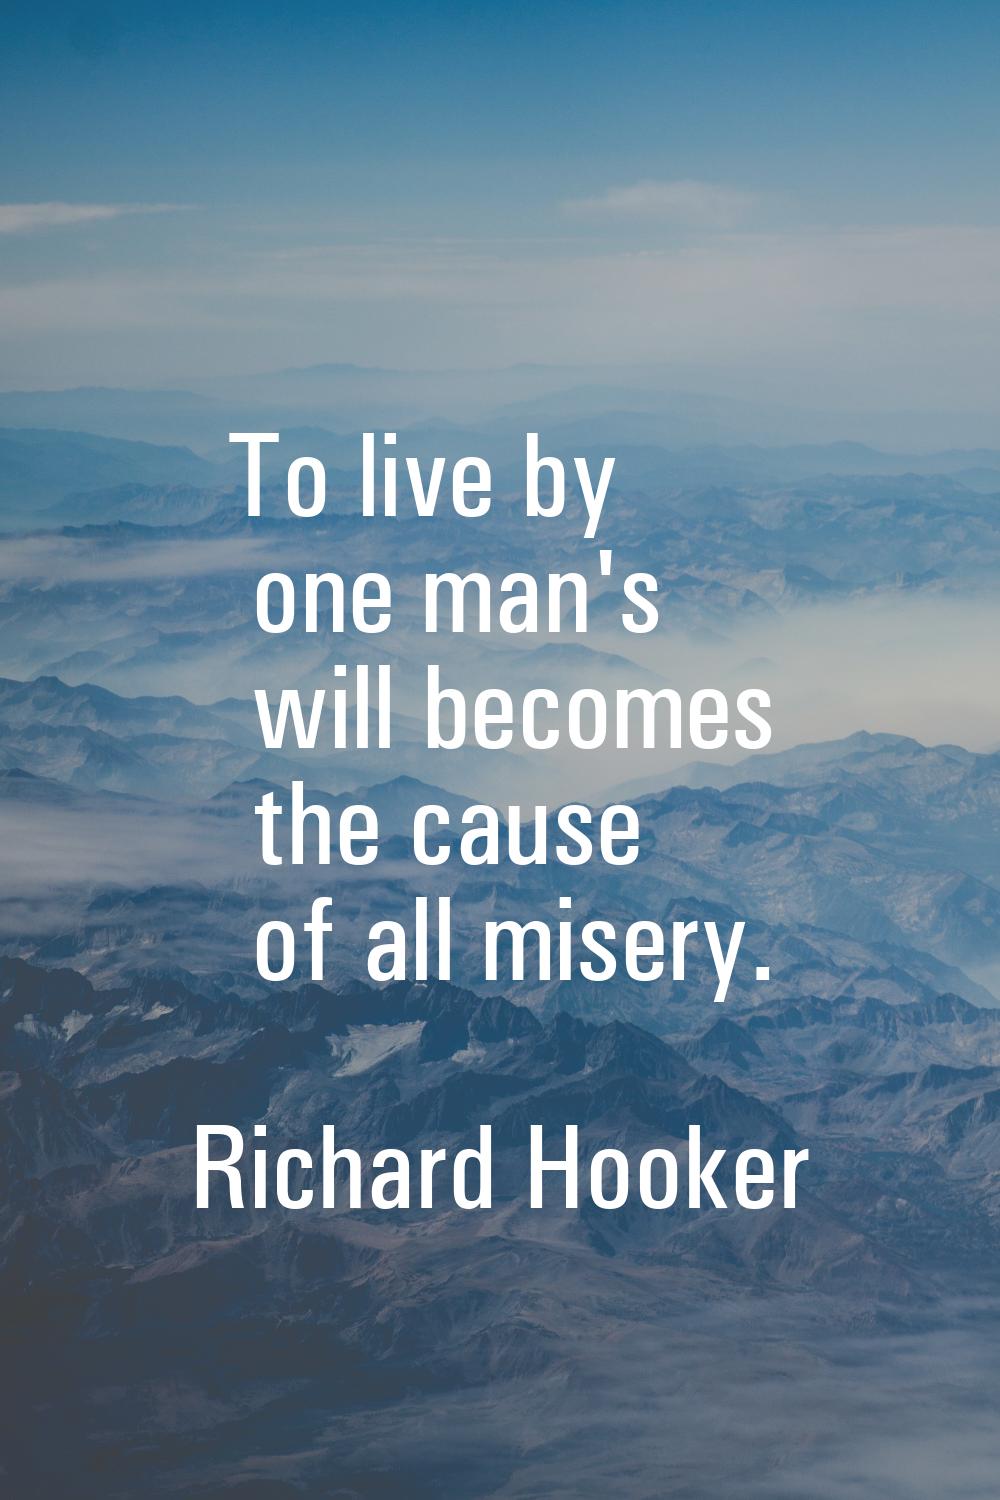 To live by one man's will becomes the cause of all misery.